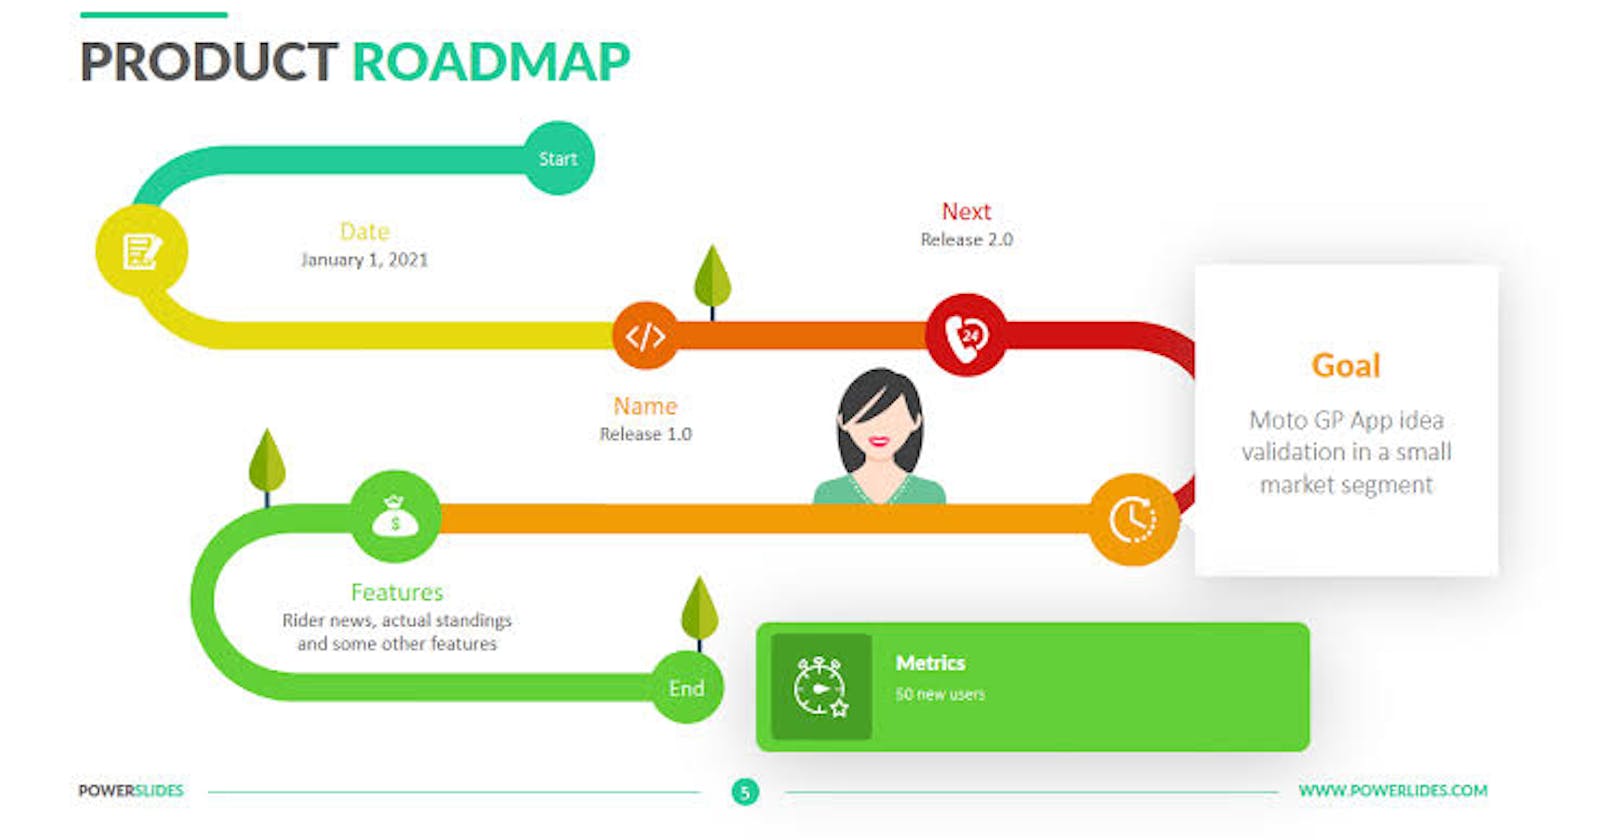 Disadvantages of having a Clustered Product Roadmap